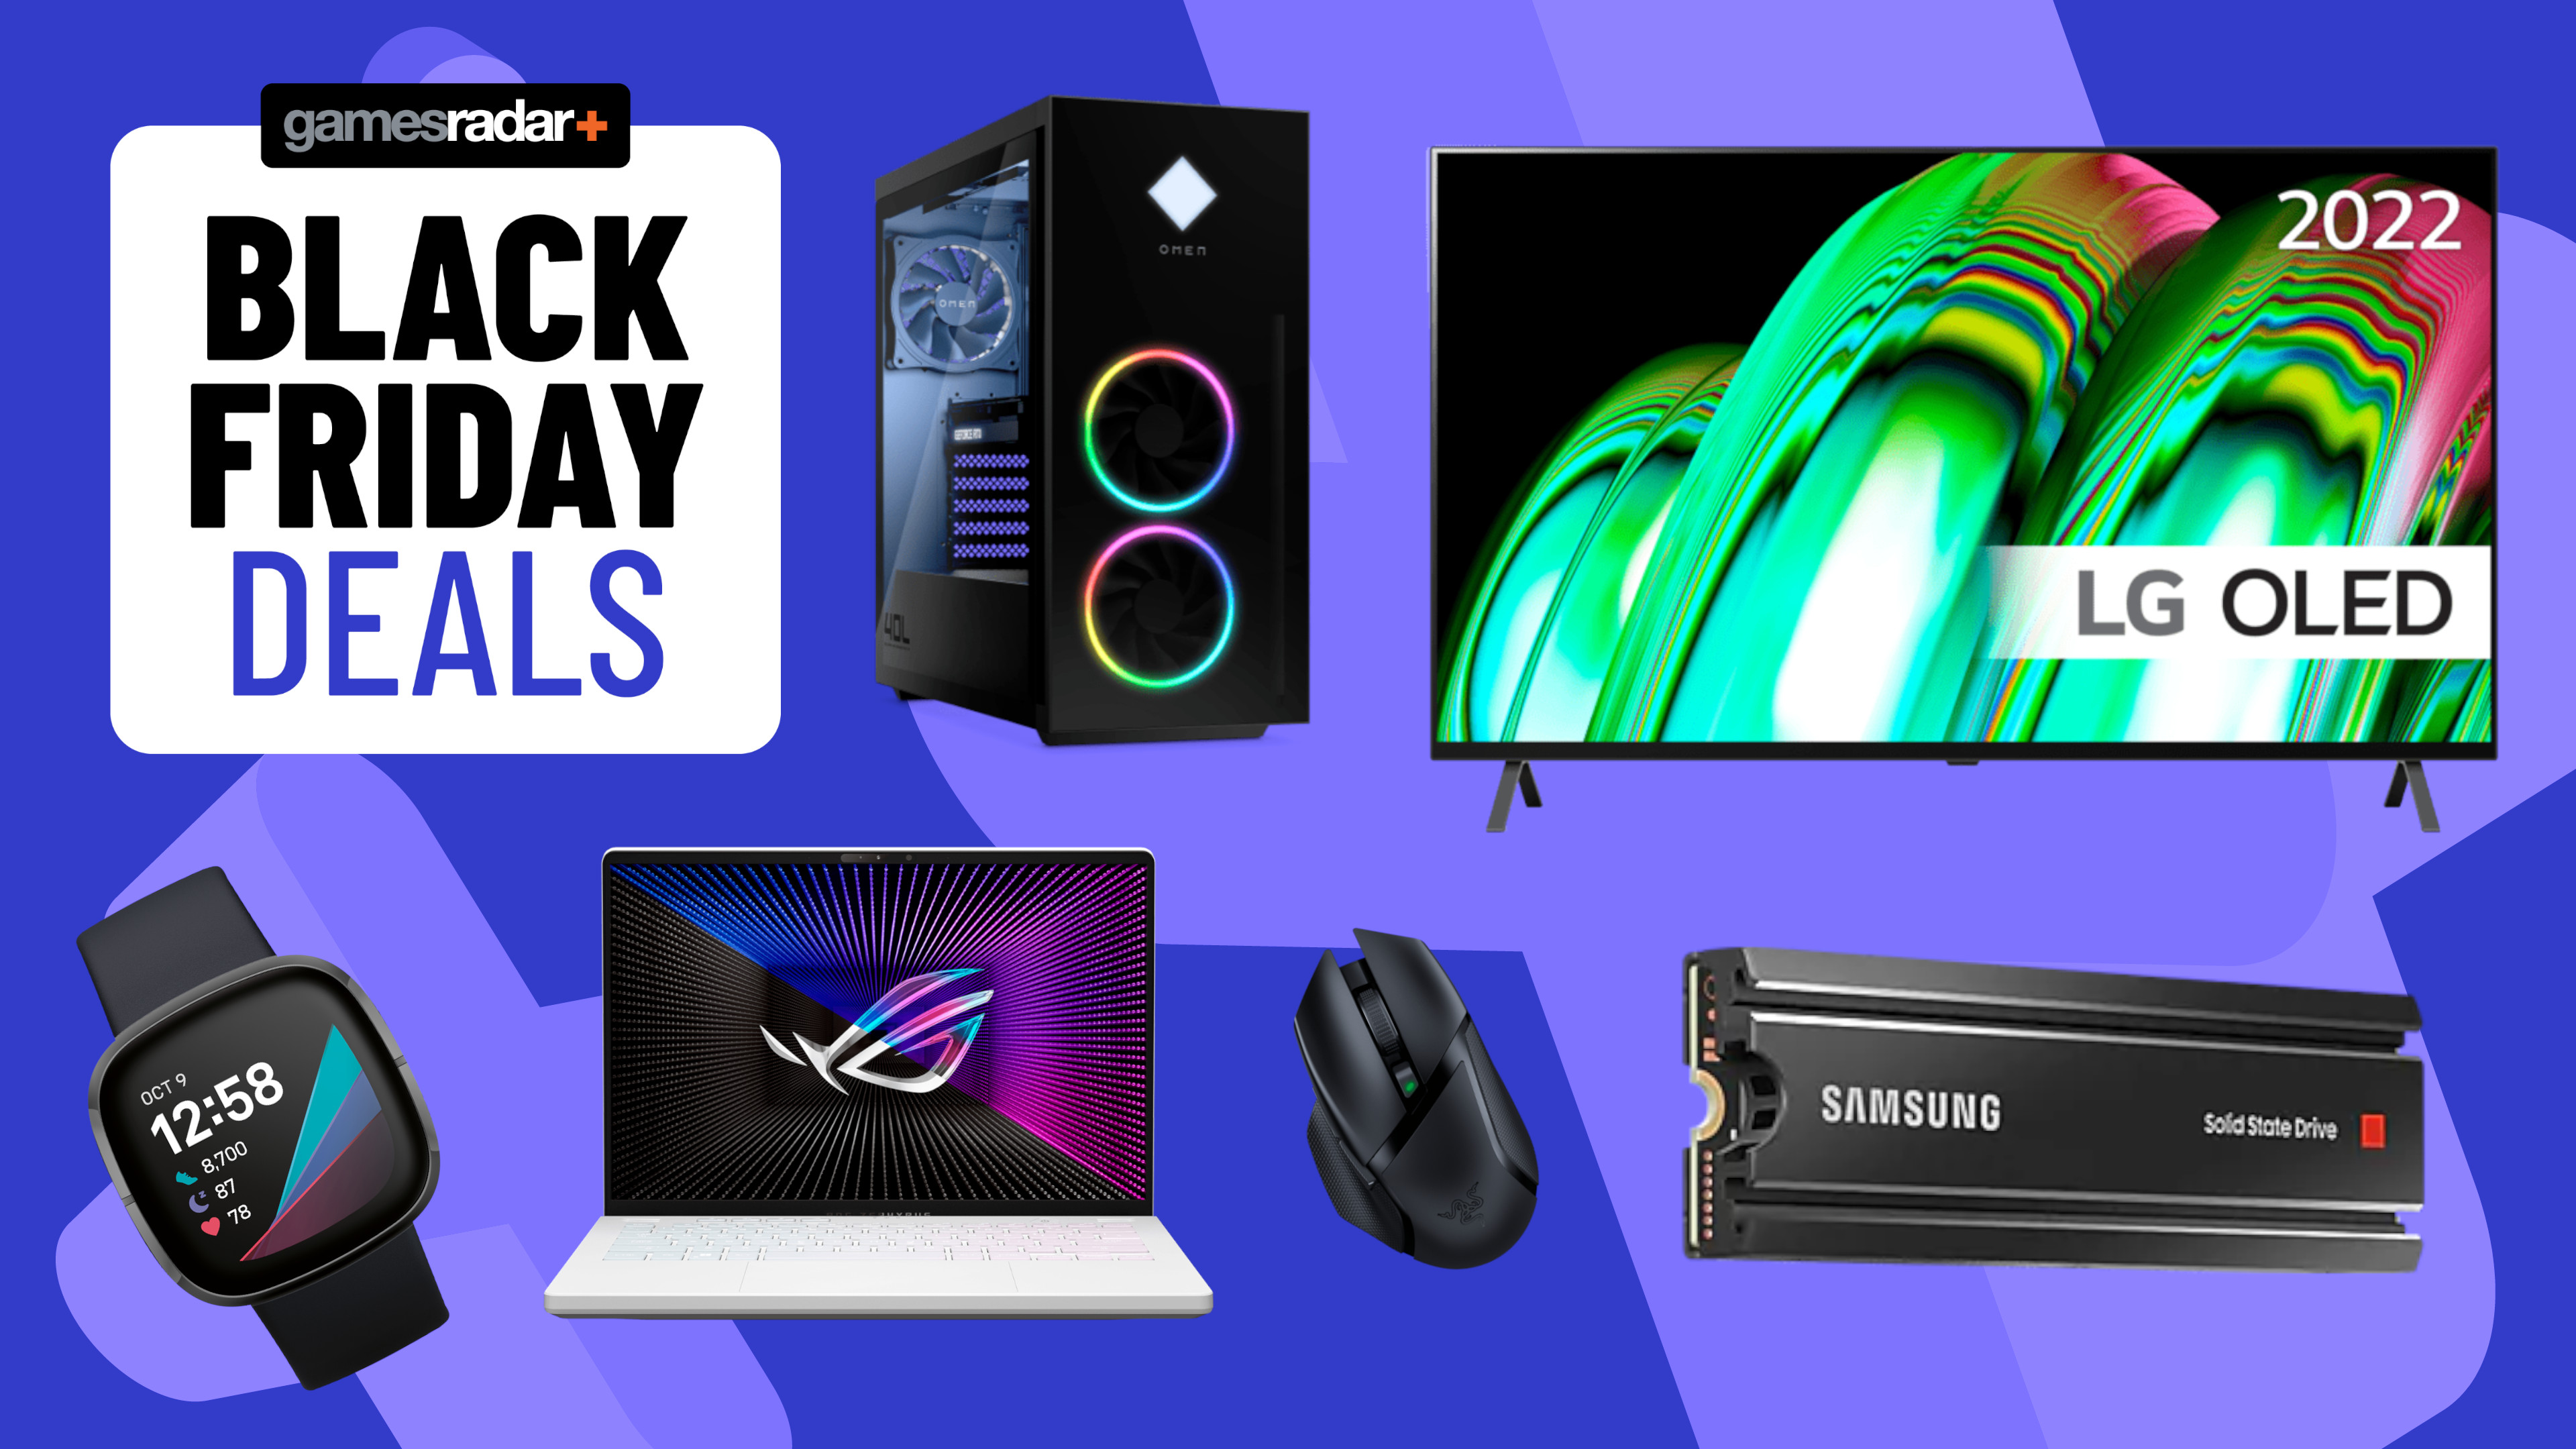 Black Friday 2022 gaming deals: Nintendo, PS5, Xbox, VR and more